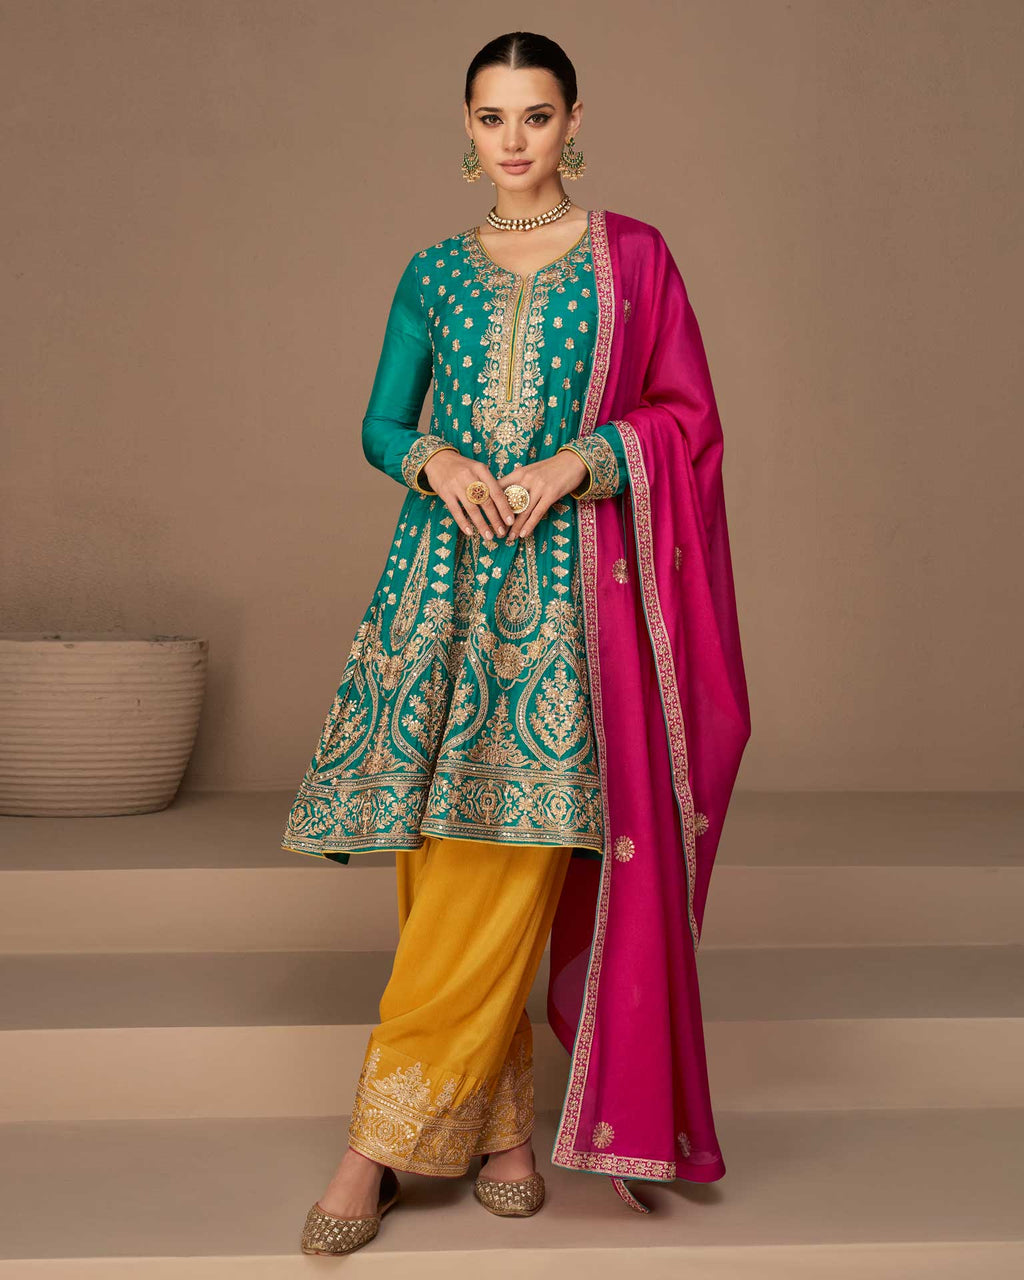 Chinon Silk Blue Yellow & Pink Frock Suit With Zari Work